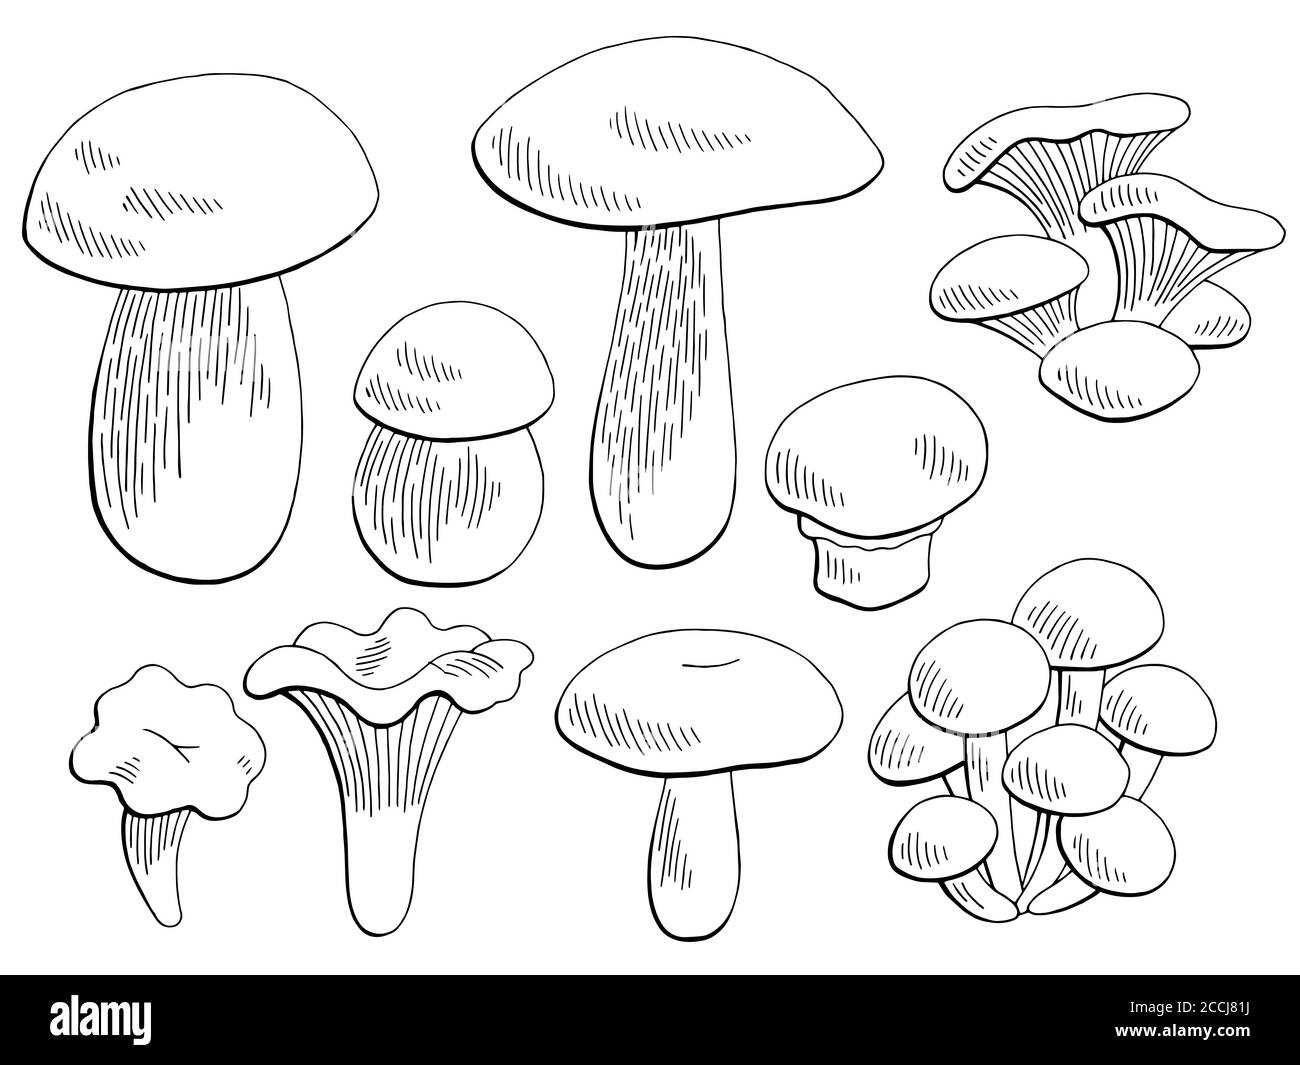 Mushrooms set graphic black white isolated sketch illustration vector Stock Vector